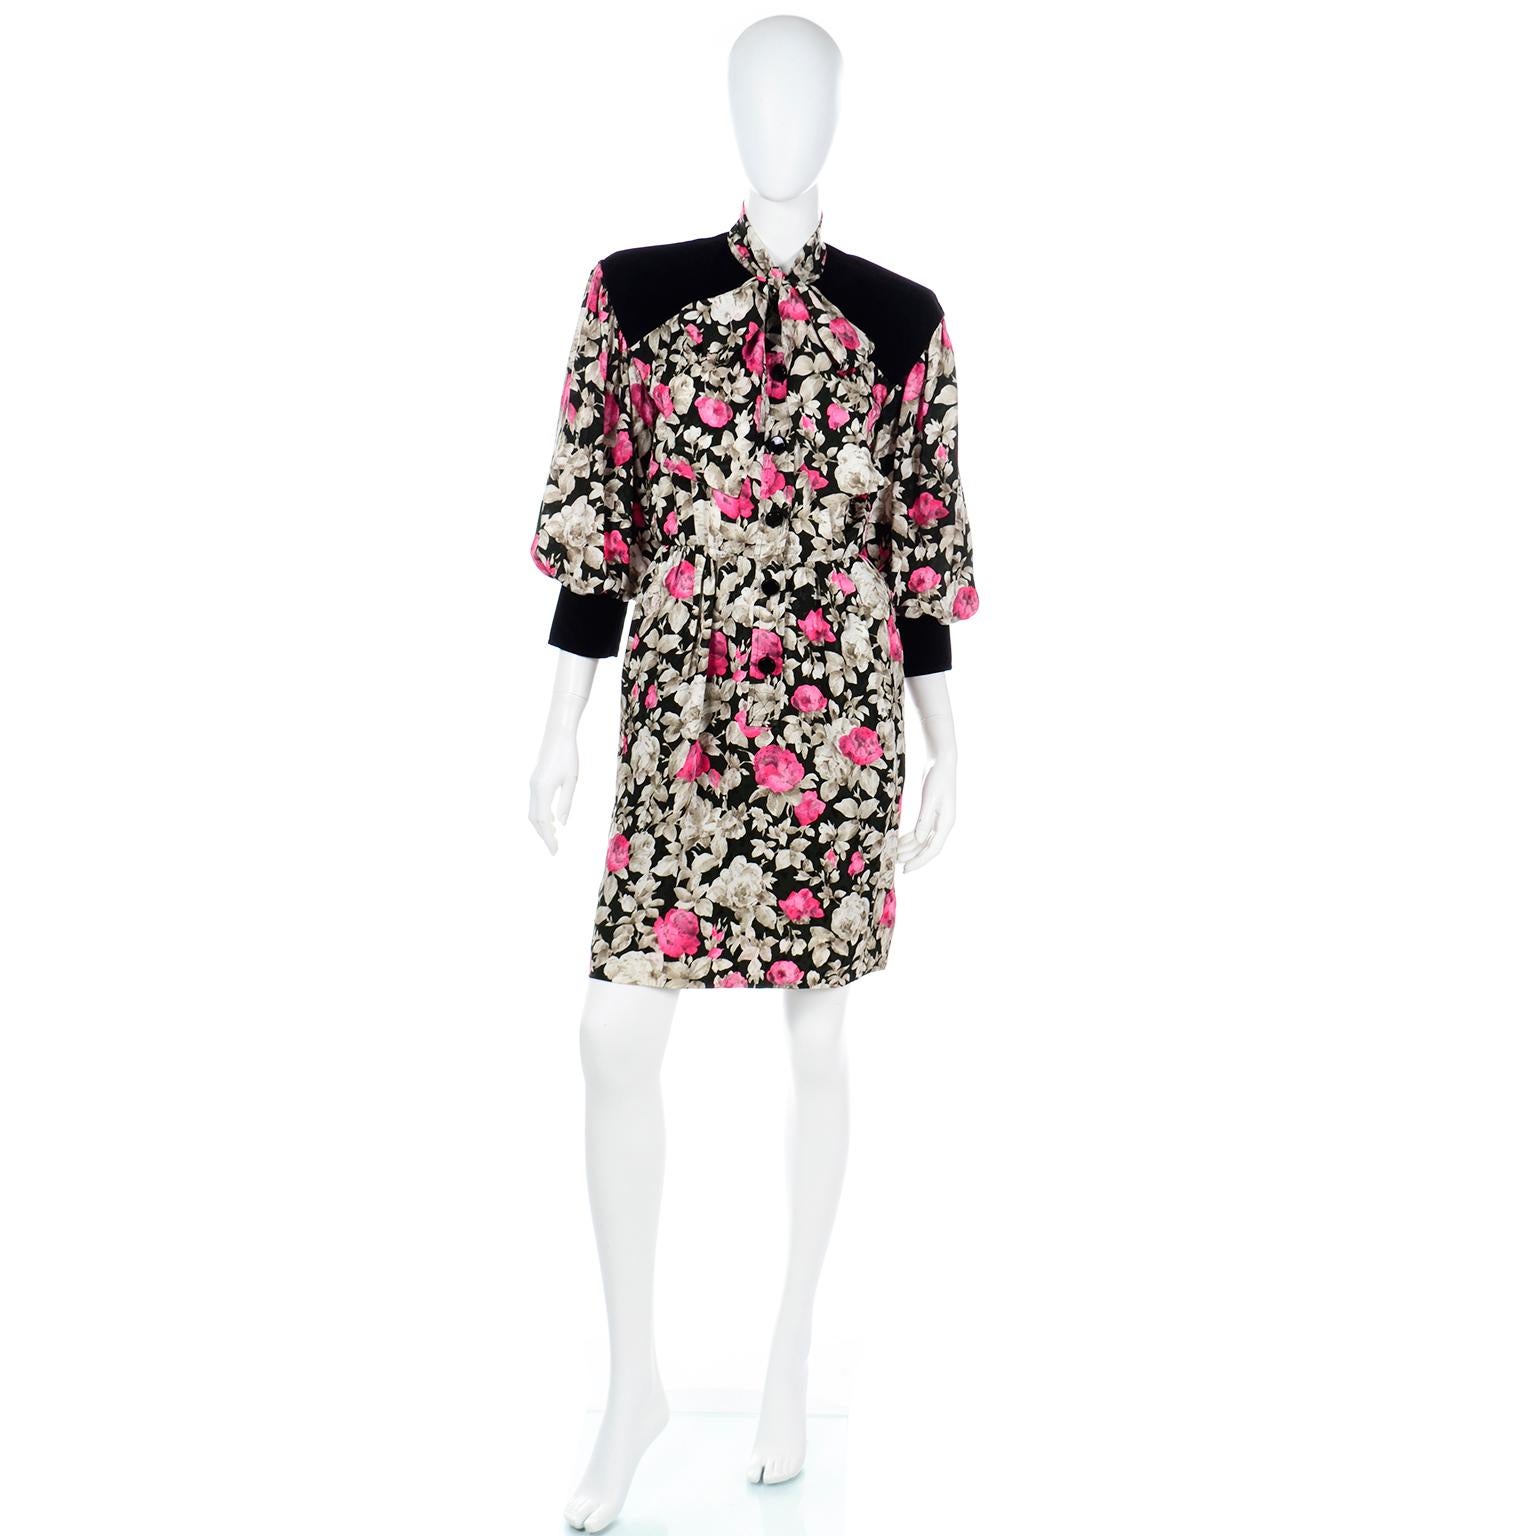 This iconic Yves Saint Laurent dress is in a fine floral silk in shades of dove grey and pink on a black background with black velvet trim at the cuffs, yoke and over the shoulders. This dress was featured on the 1984 YSL runway and was illustrated